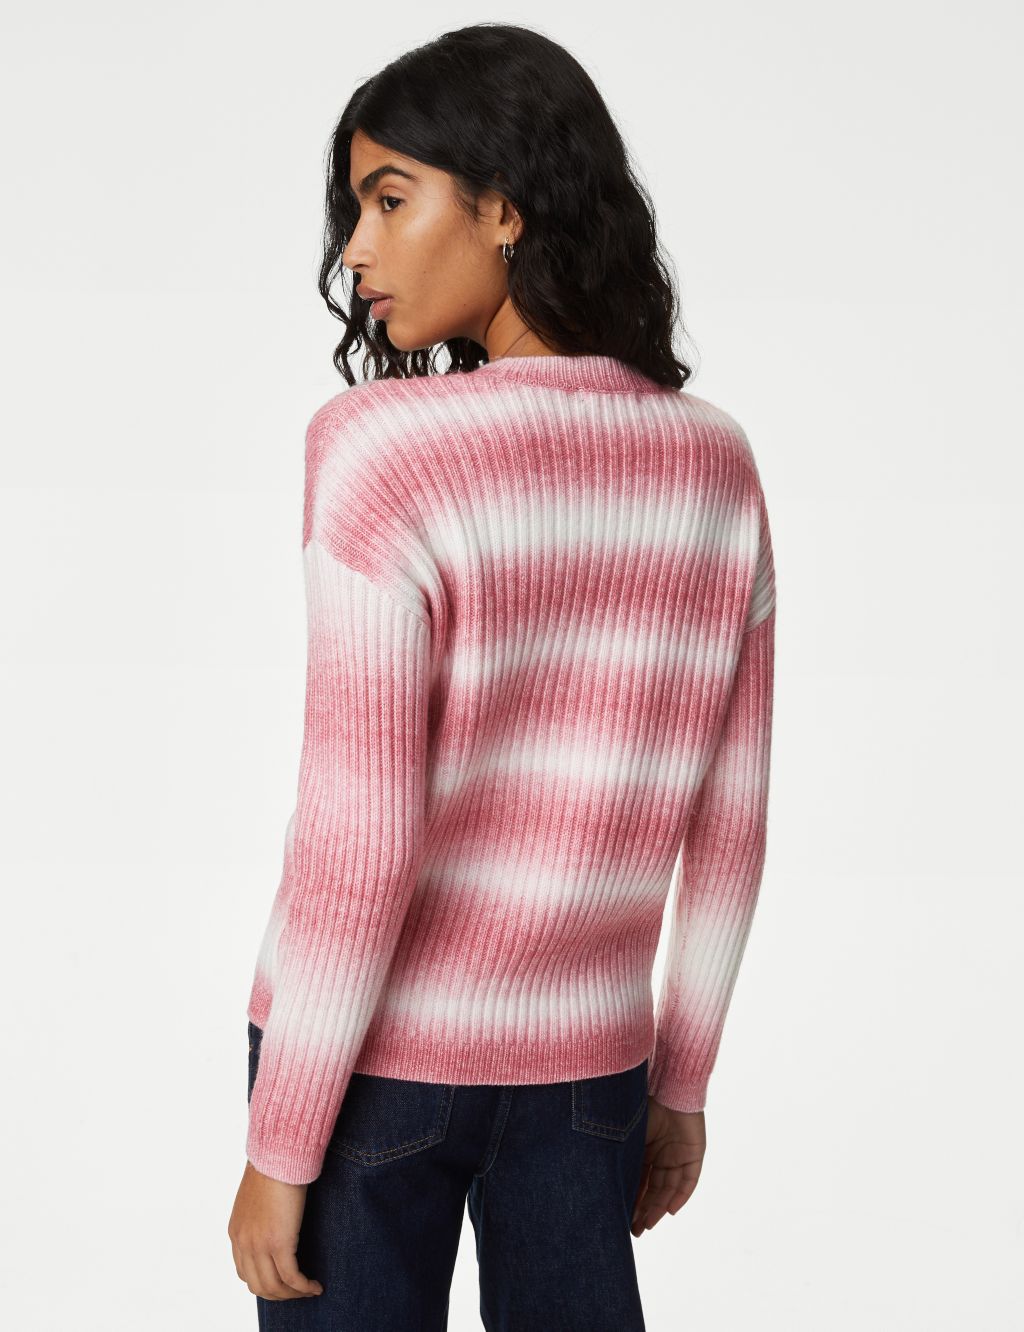 Cloud-Yarn Ombre Striped Crew Neck Jumper image 5